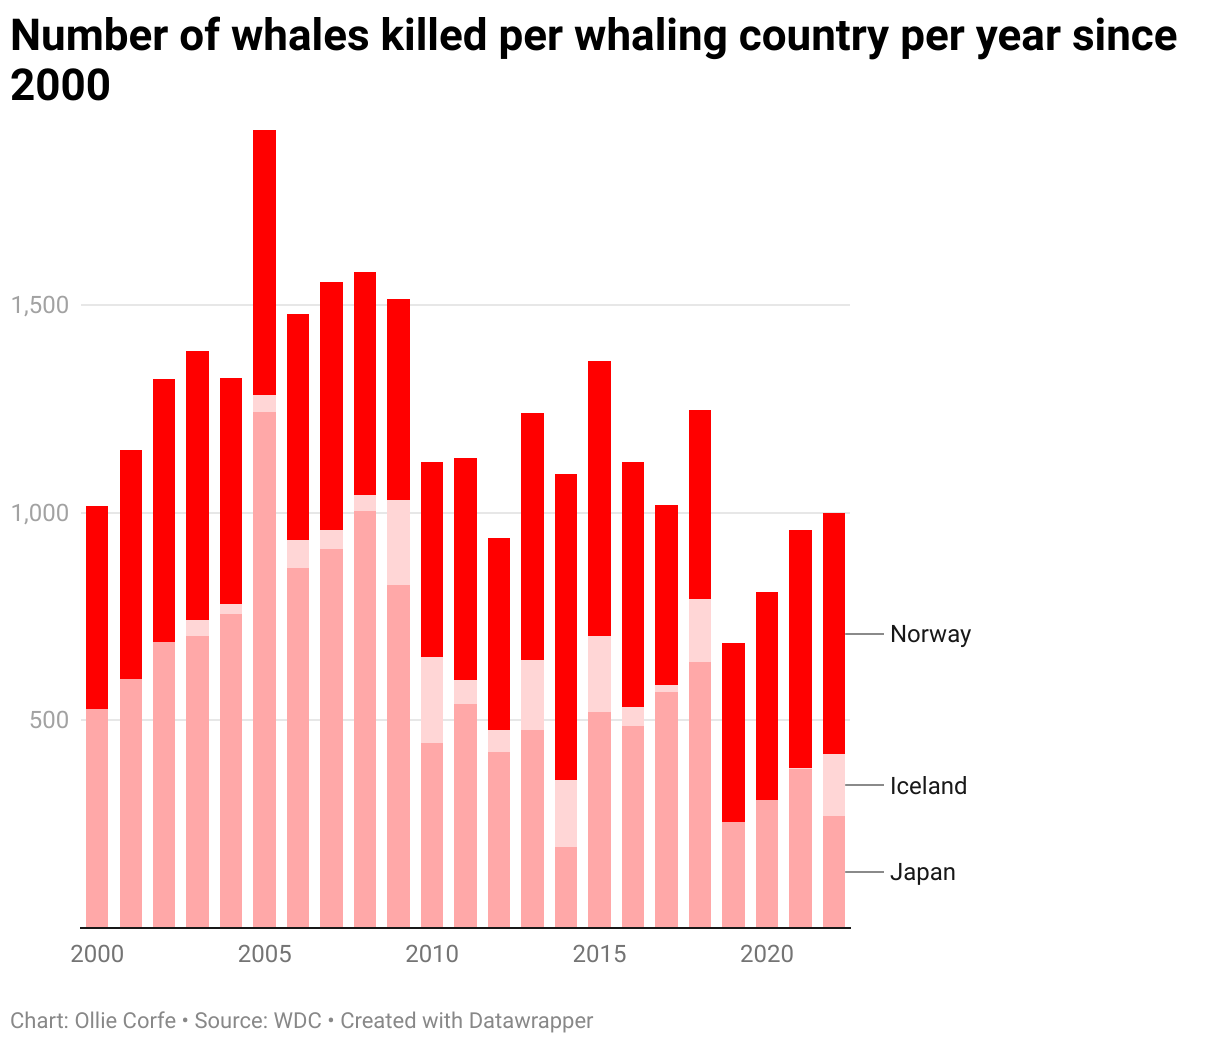 Whales killed per country per year.